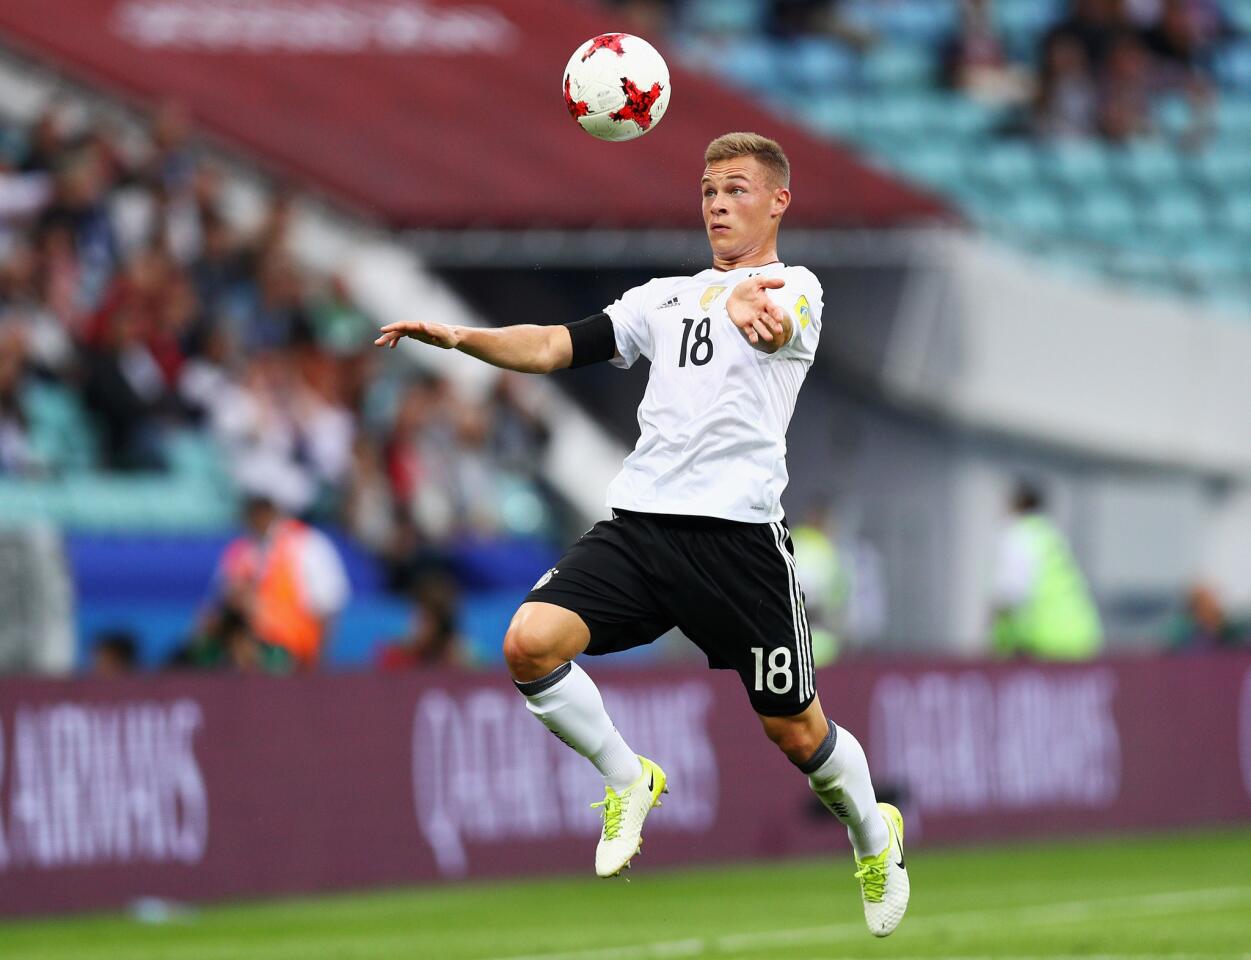 SOCHI, RUSSIA - JUNE 19: Joshua Kimmich of Germany in action during the FIFA Confederations Cup Russia 2017 Group B match between Australia and Germany at Fisht Olympic Stadium on June 19, 2017 in Sochi, Russia. (Photo by Buda Mendes/Getty Images) ** OUTS - ELSENT, FPG, CM - OUTS * NM, PH, VA if sourced by CT, LA or MoD **